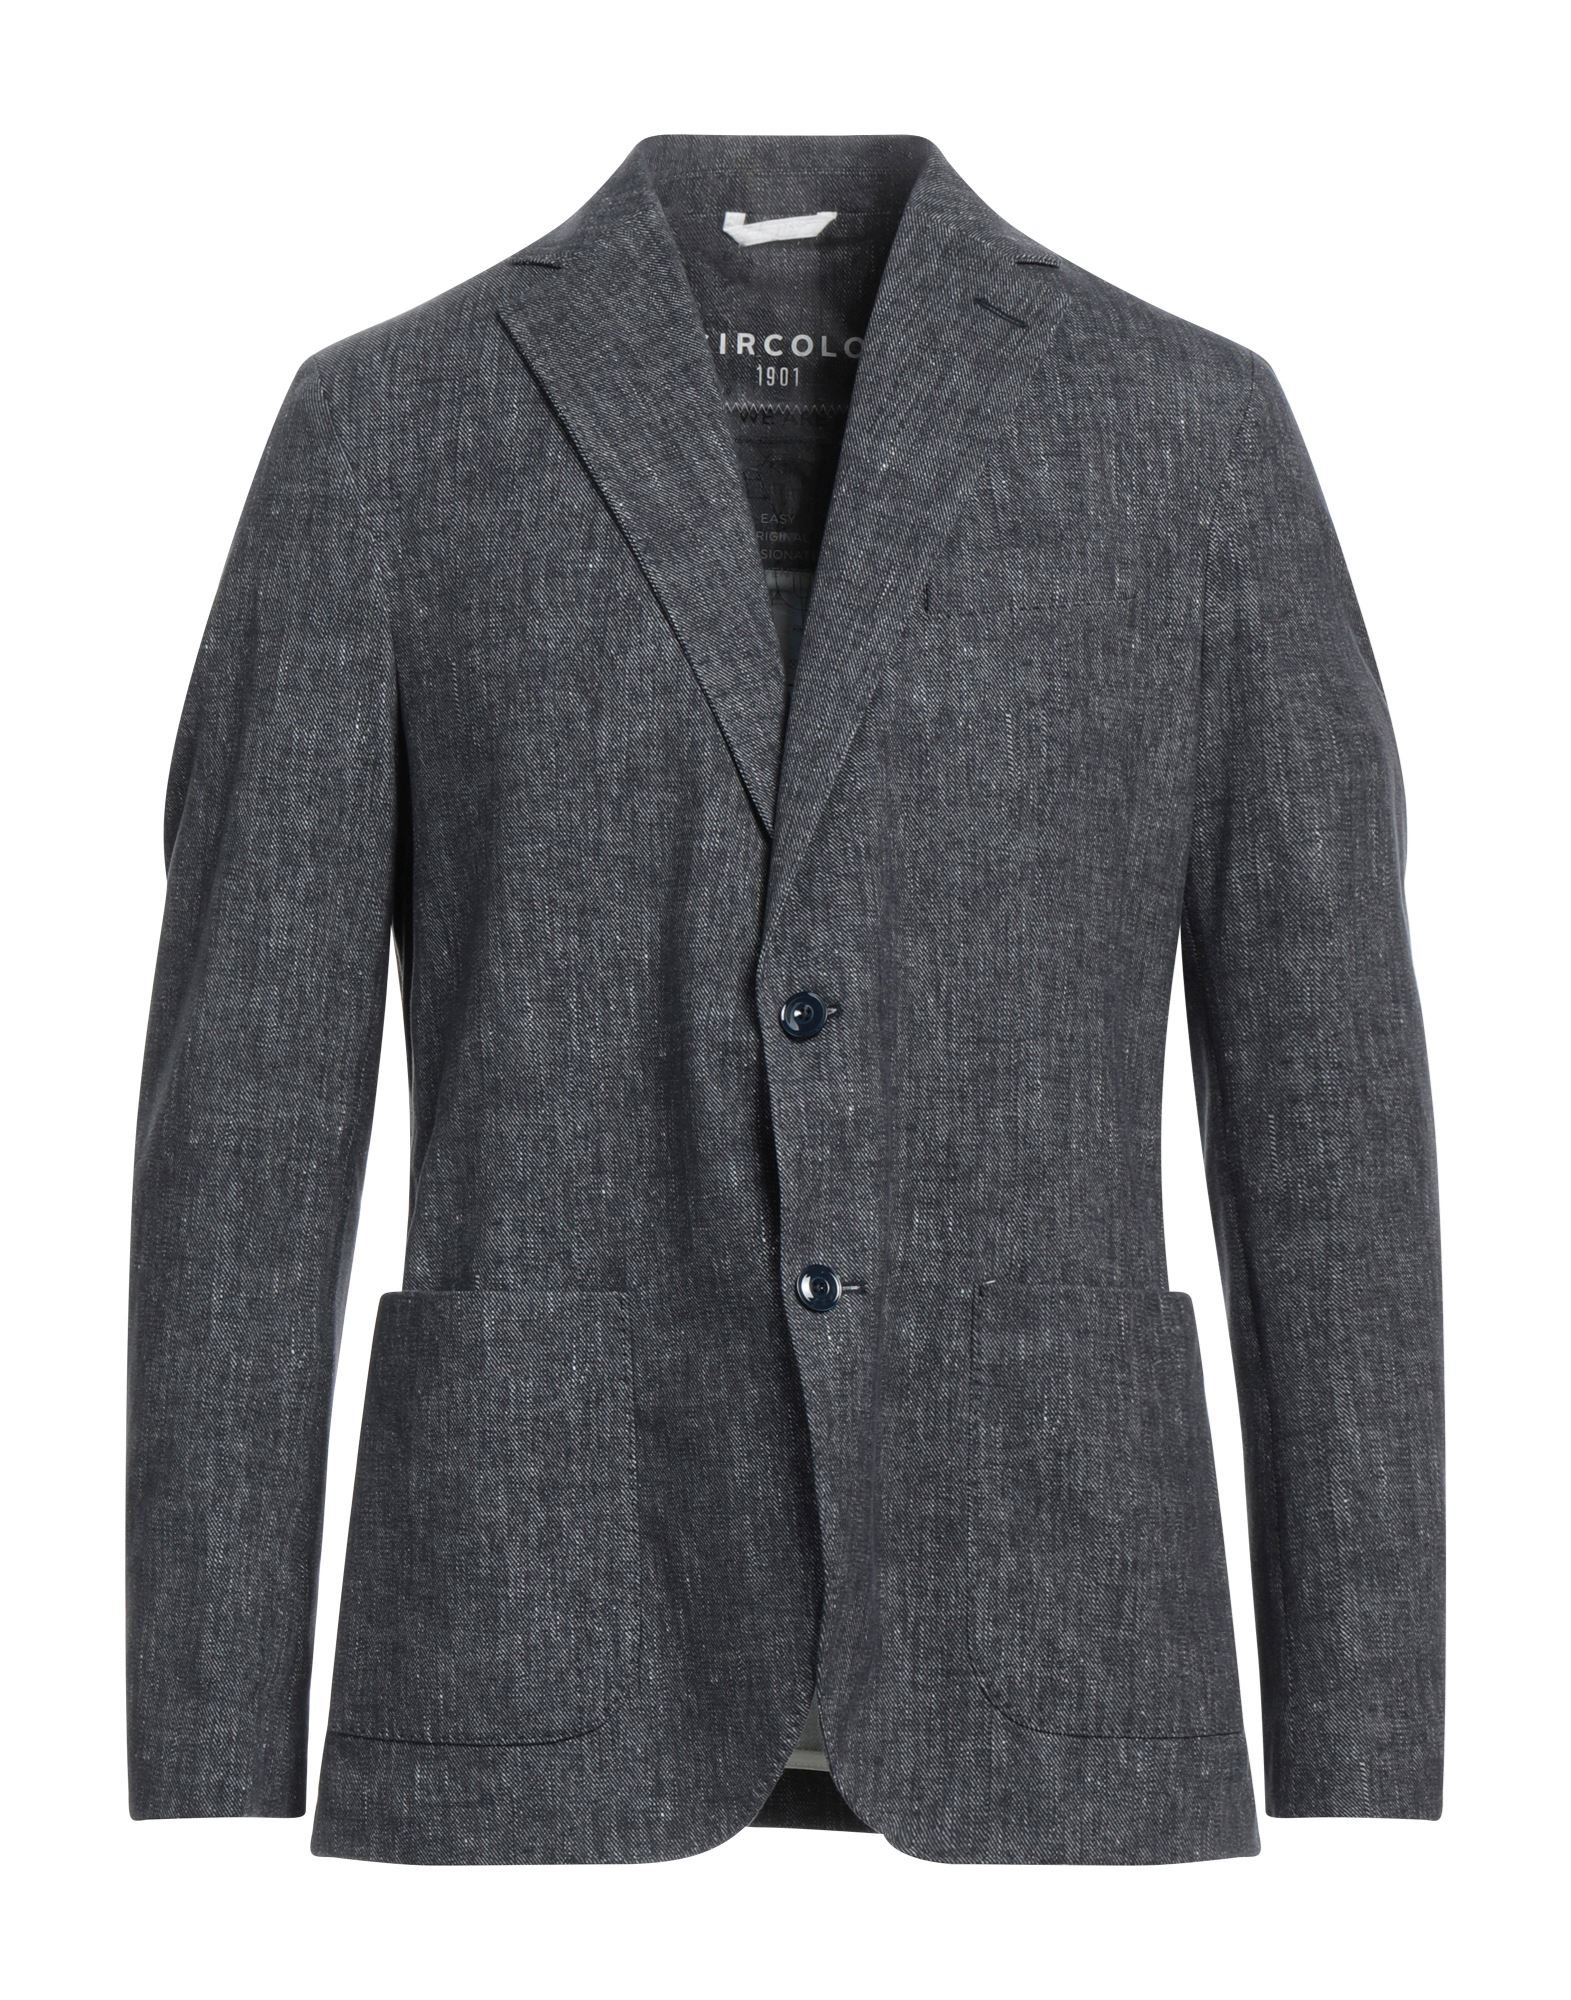 Circolo 1901 Suit Jackets In Navy Blue